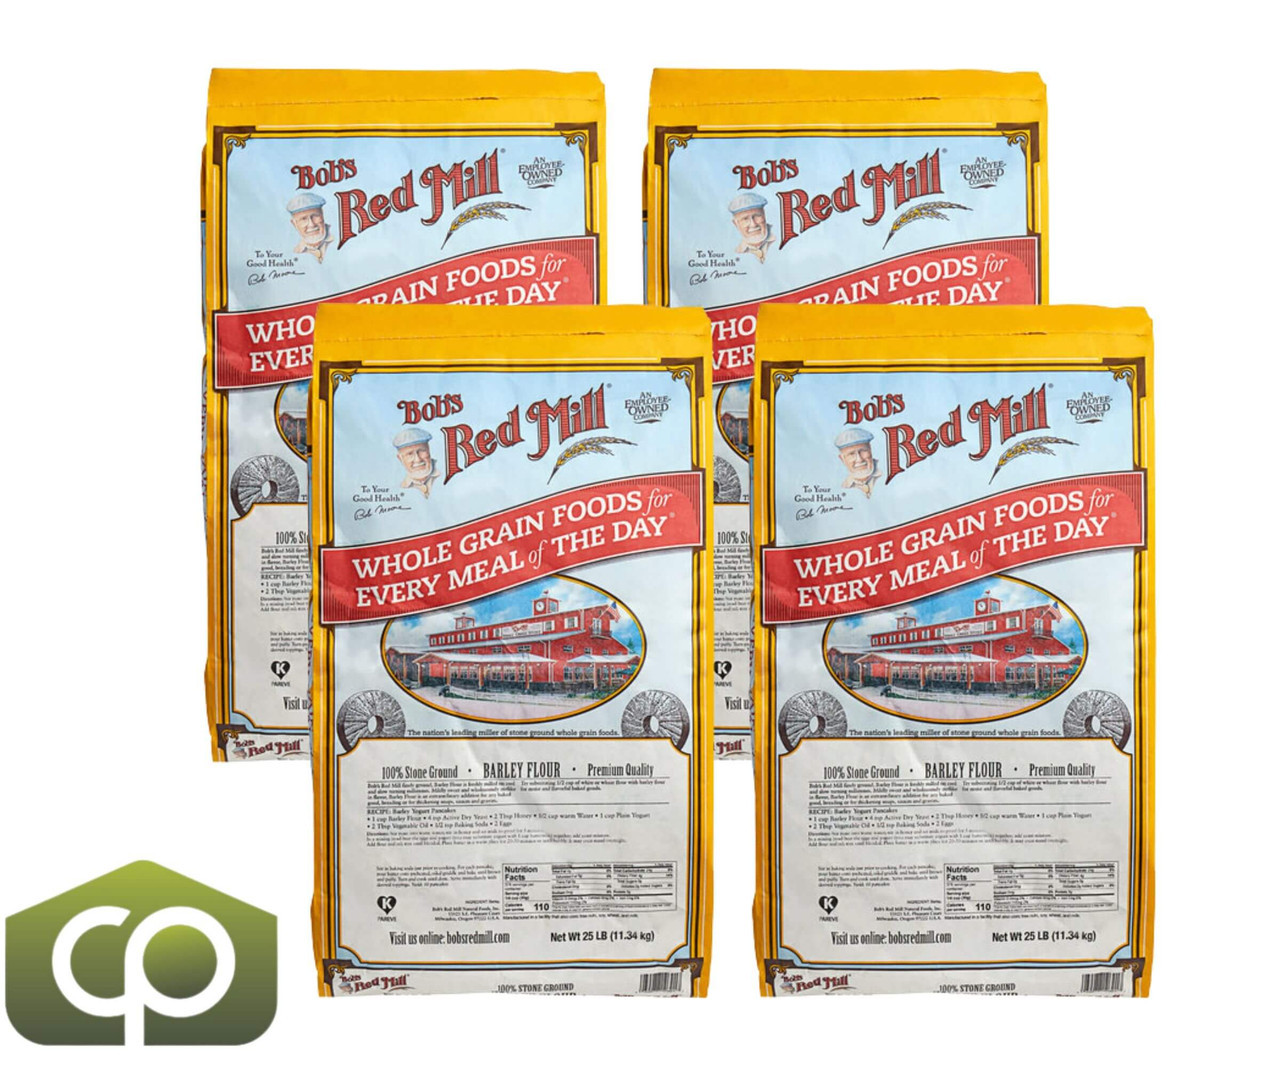 Bob's Red Mill 25 lbs. (11.34 kg) Barley Flour - Rich, Nutty Goodness (60 BAGS/PALLET) - Chicken Pieces